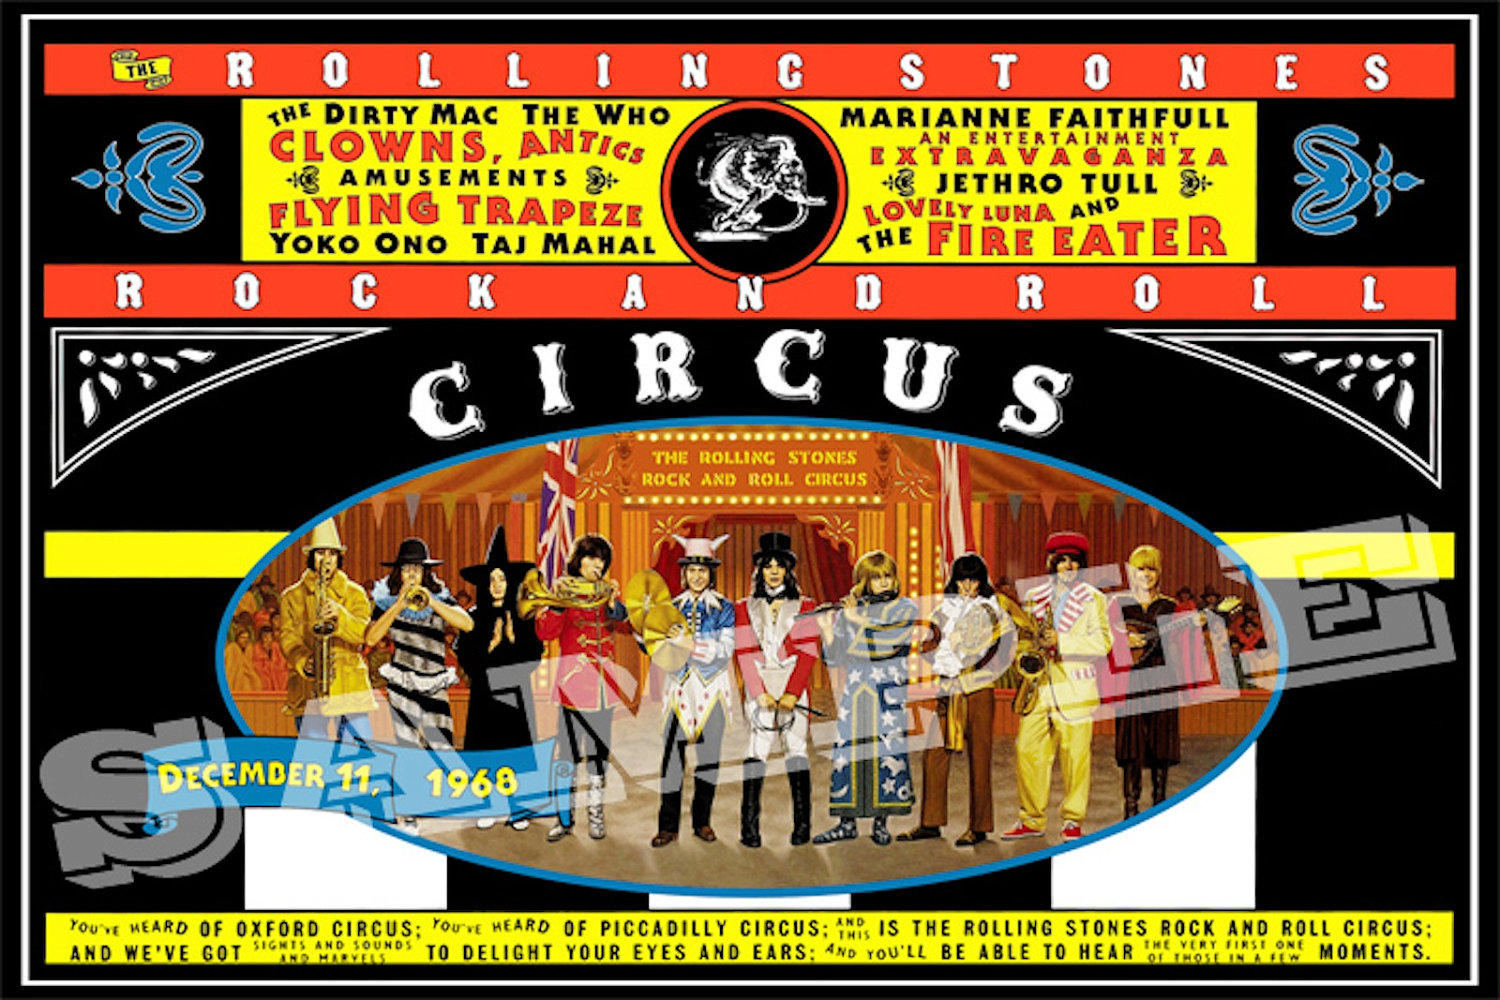 The Rolling Stones Rock’n’roll circus